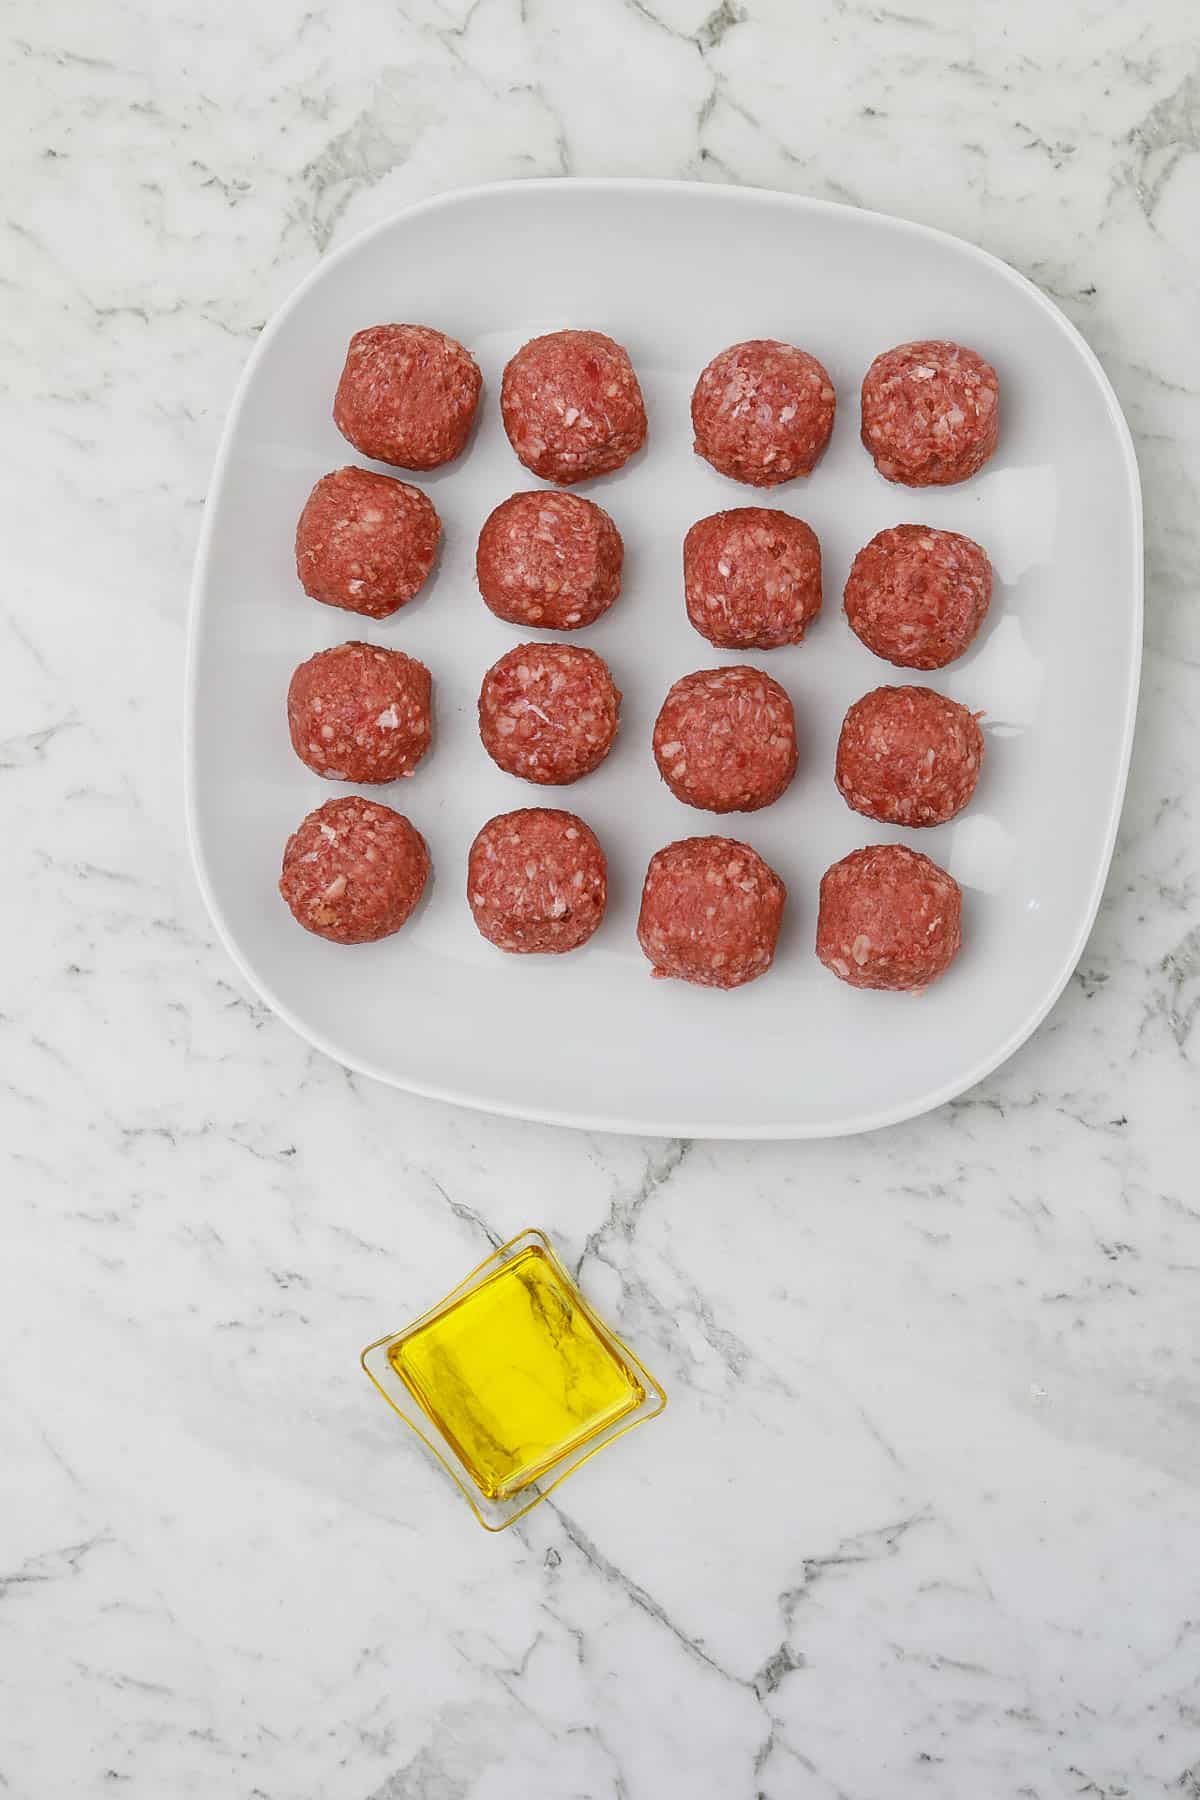 meatballs in a plate and oil in a small bowl.